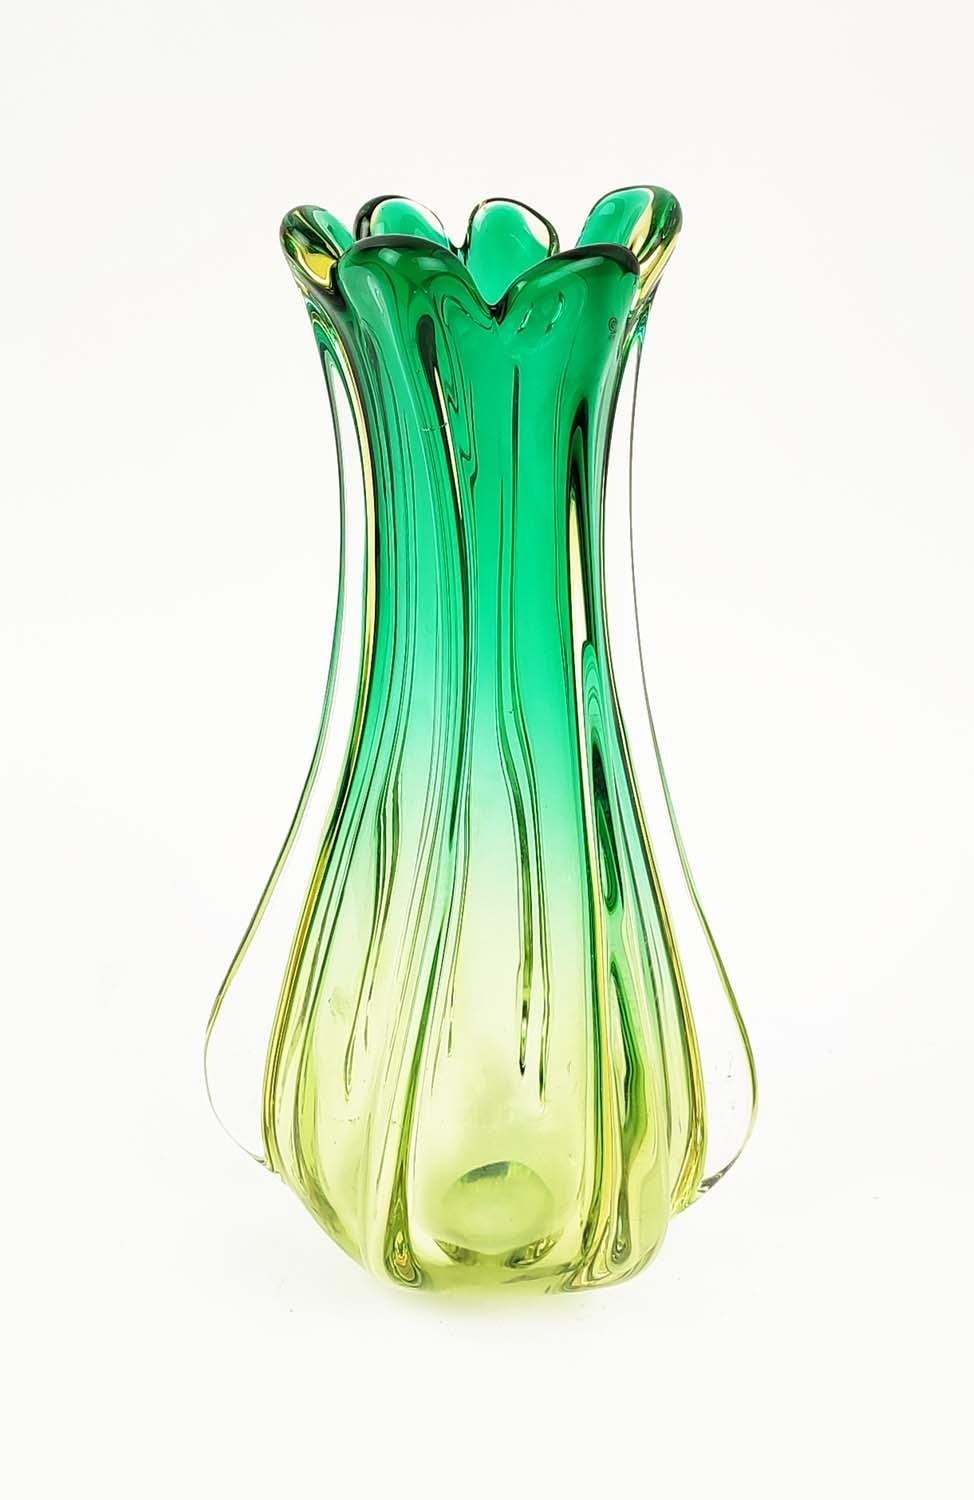 MURANO GLASS VASE, late 20th century, in green and lime green colourway, of lobed waisted form, 28cm